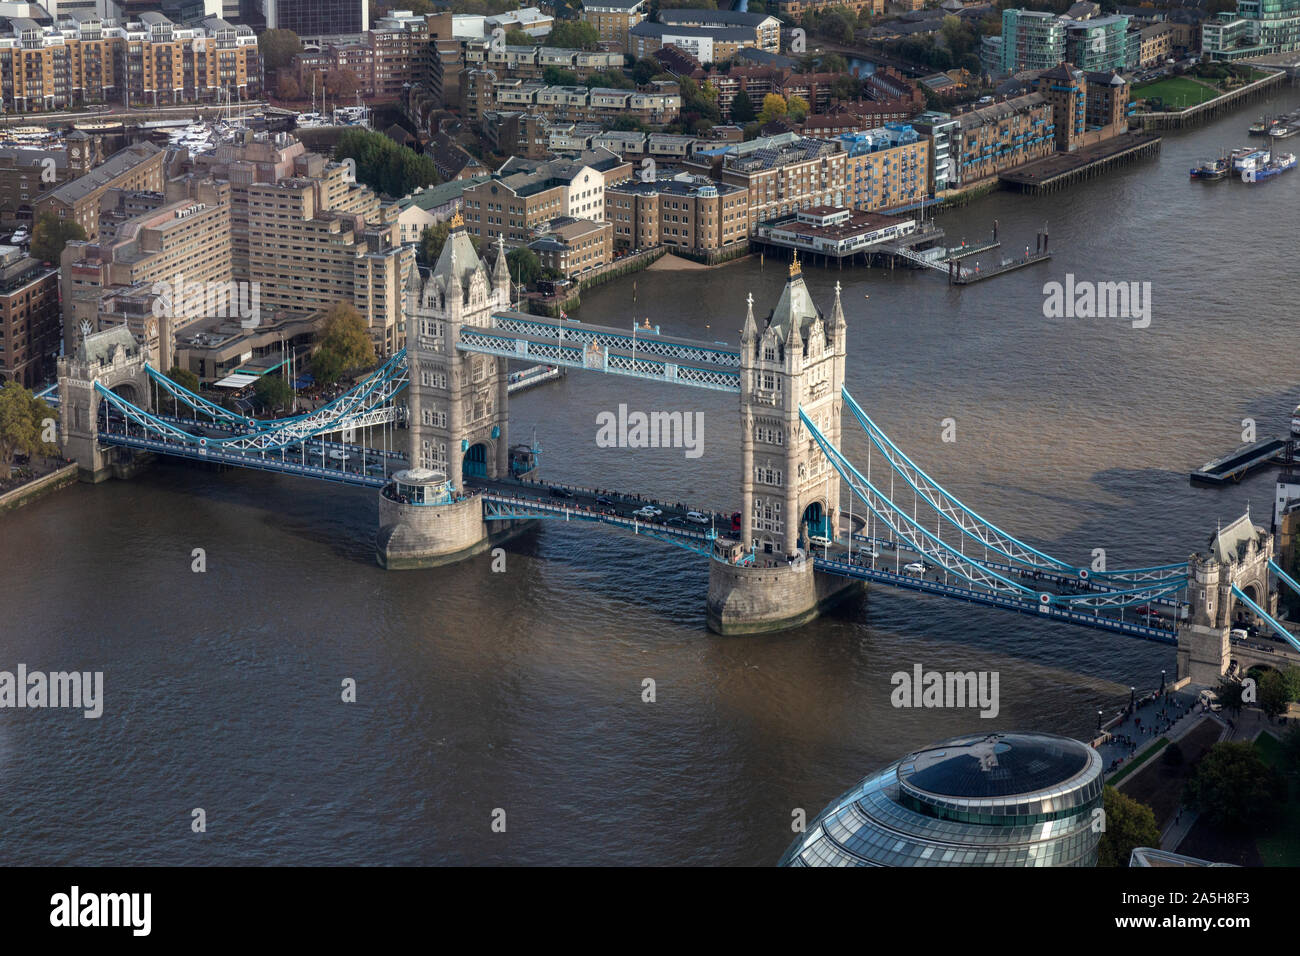 An aerial view looking down on Tower Bridge across the River Thames in London, England. Stock Photo